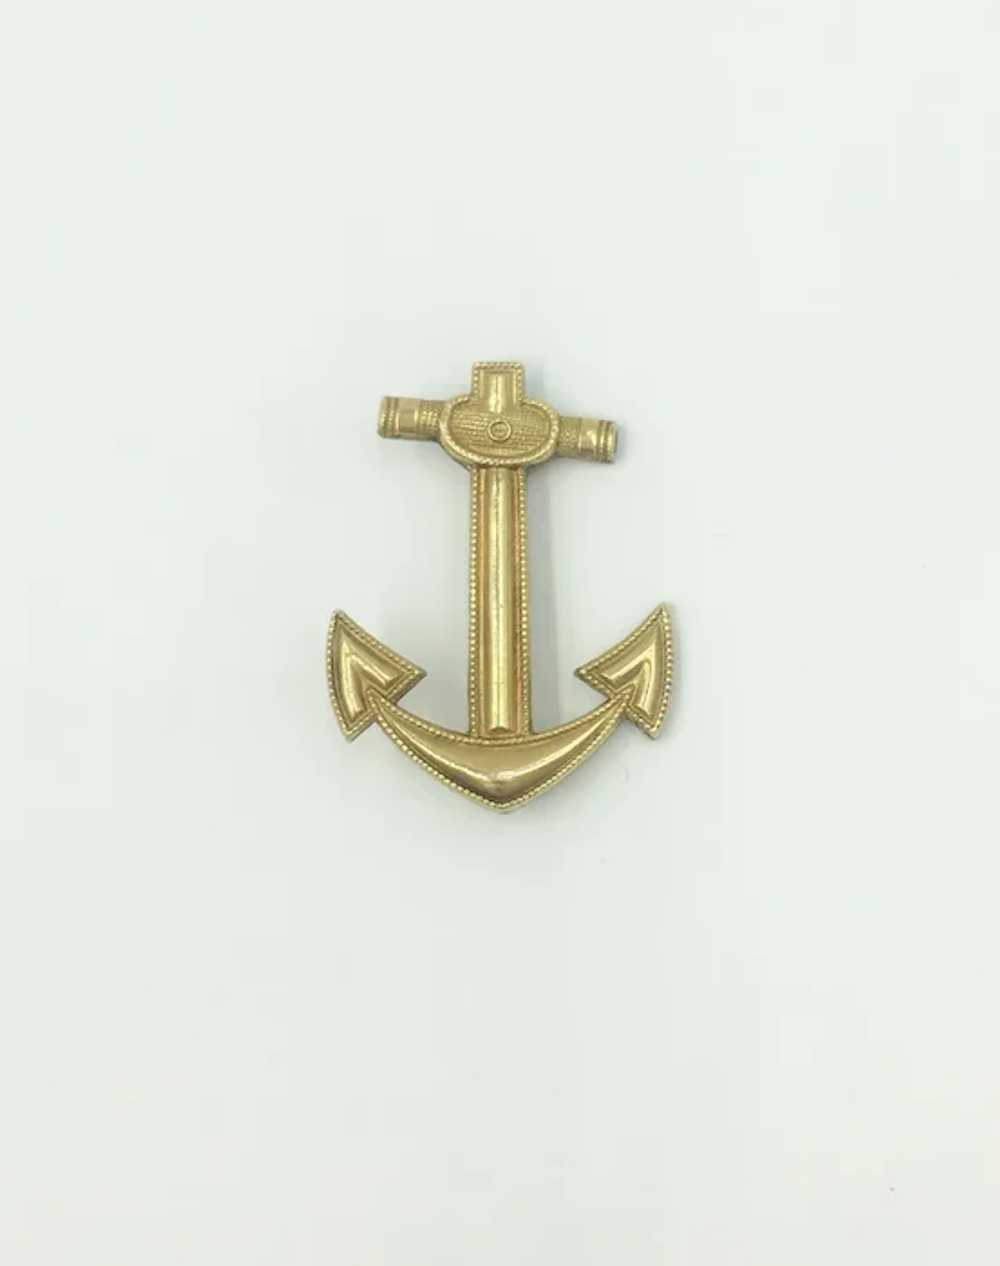 Anchor Nautical Vintage 10K Yellow Gold Filled Pin Br… - Gem